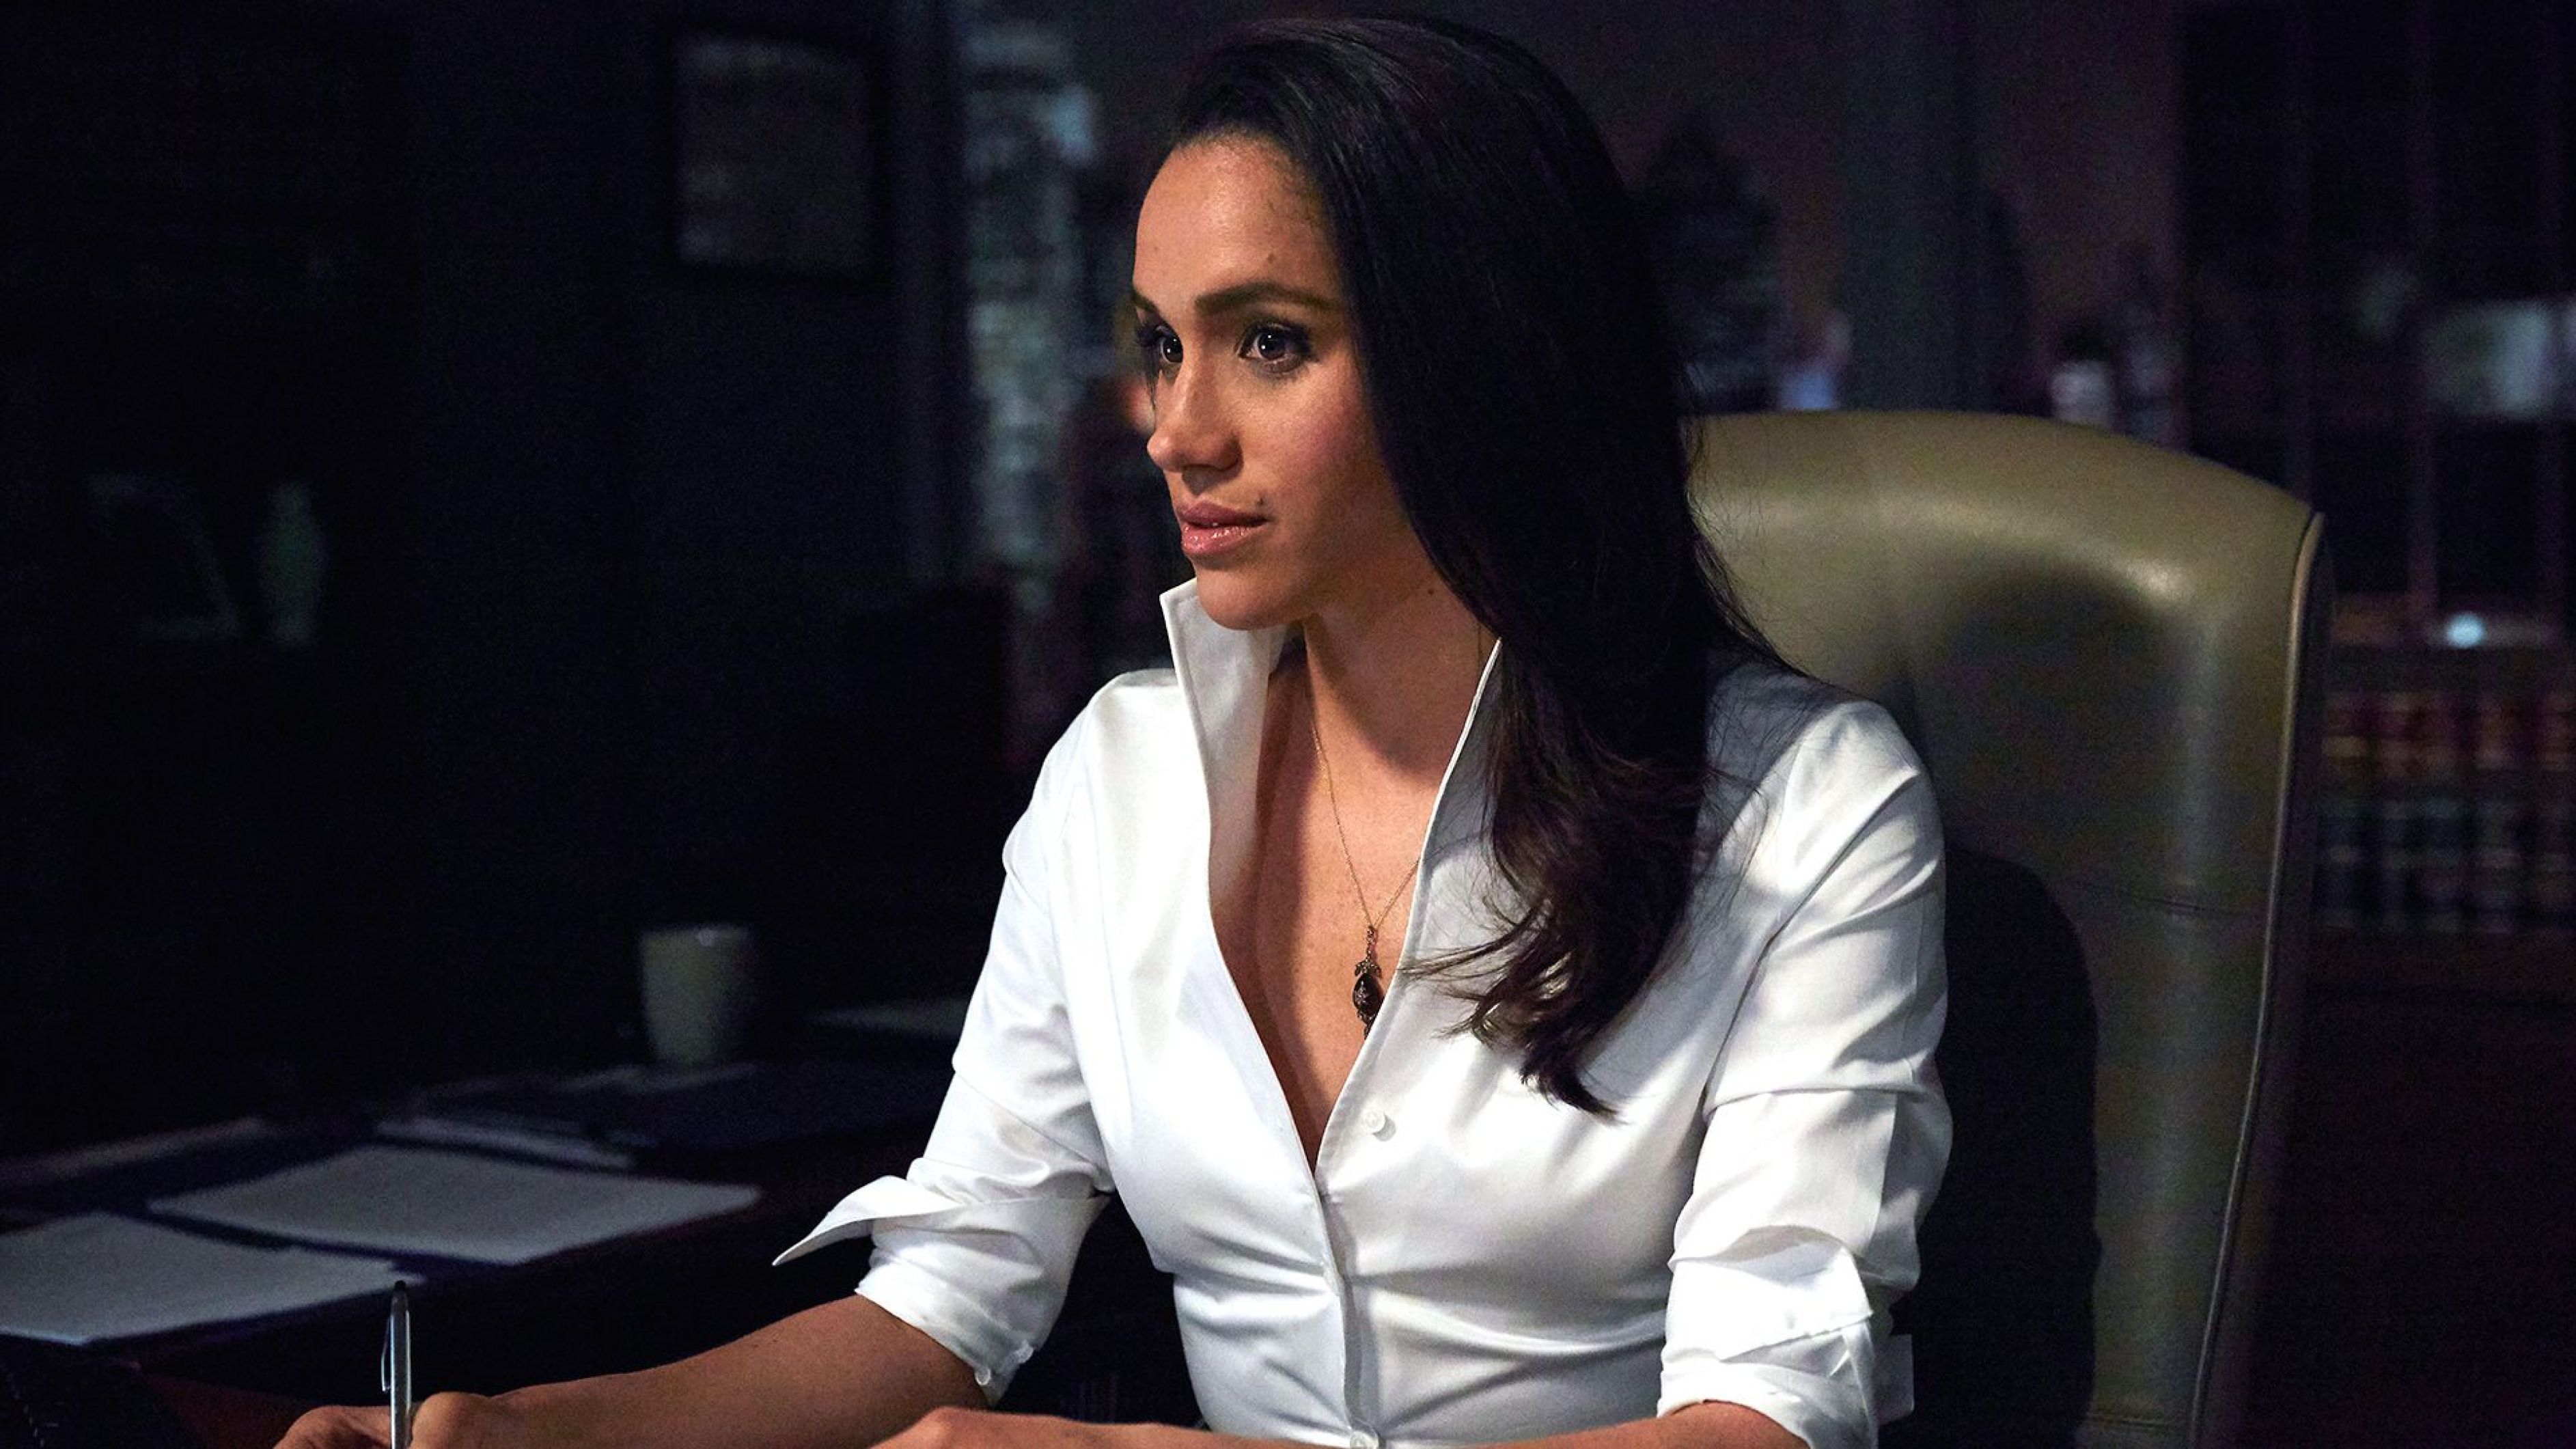 Meghan Markle in ‘Suits’